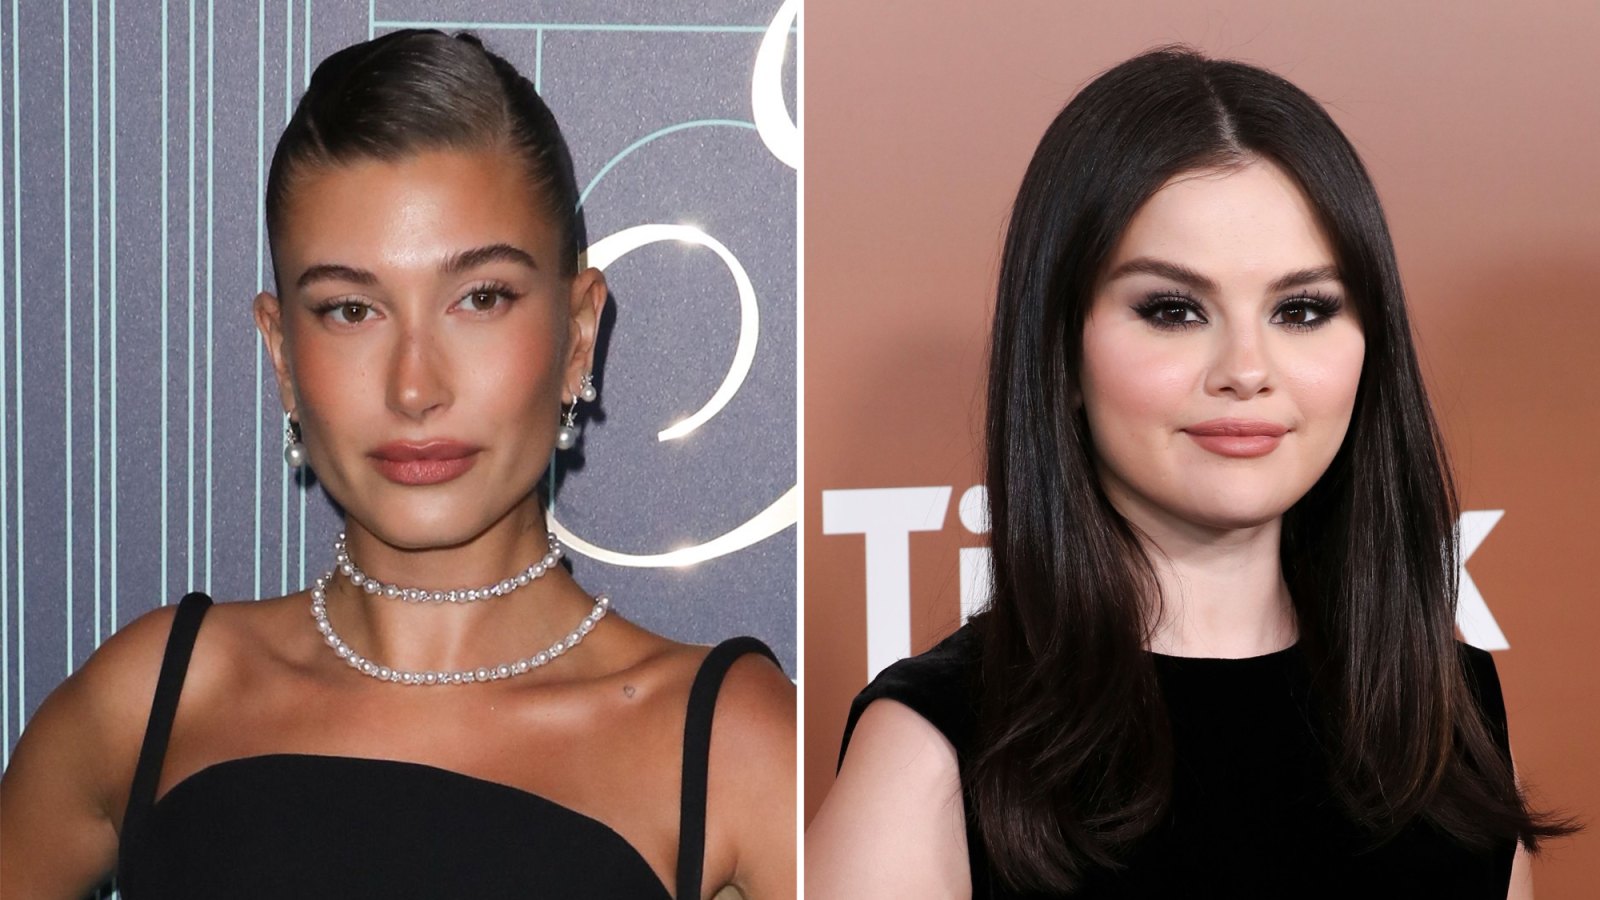 Hailey Bieber Supports Selena Gomez After Ending Feud Rumors